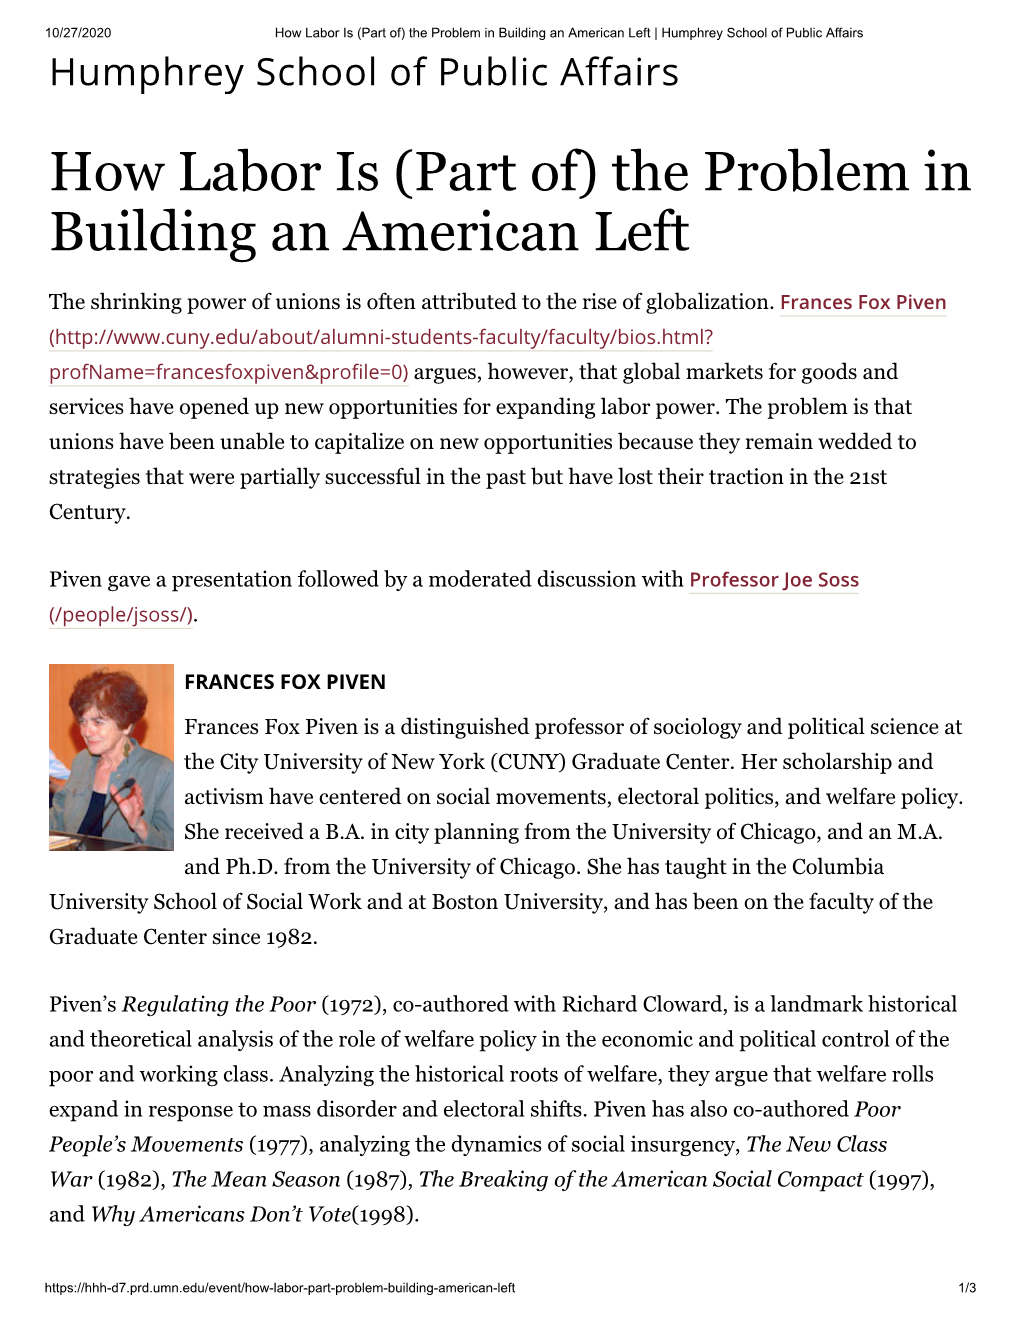 How Labor Is (Part Of) the Problem in Building an American Left